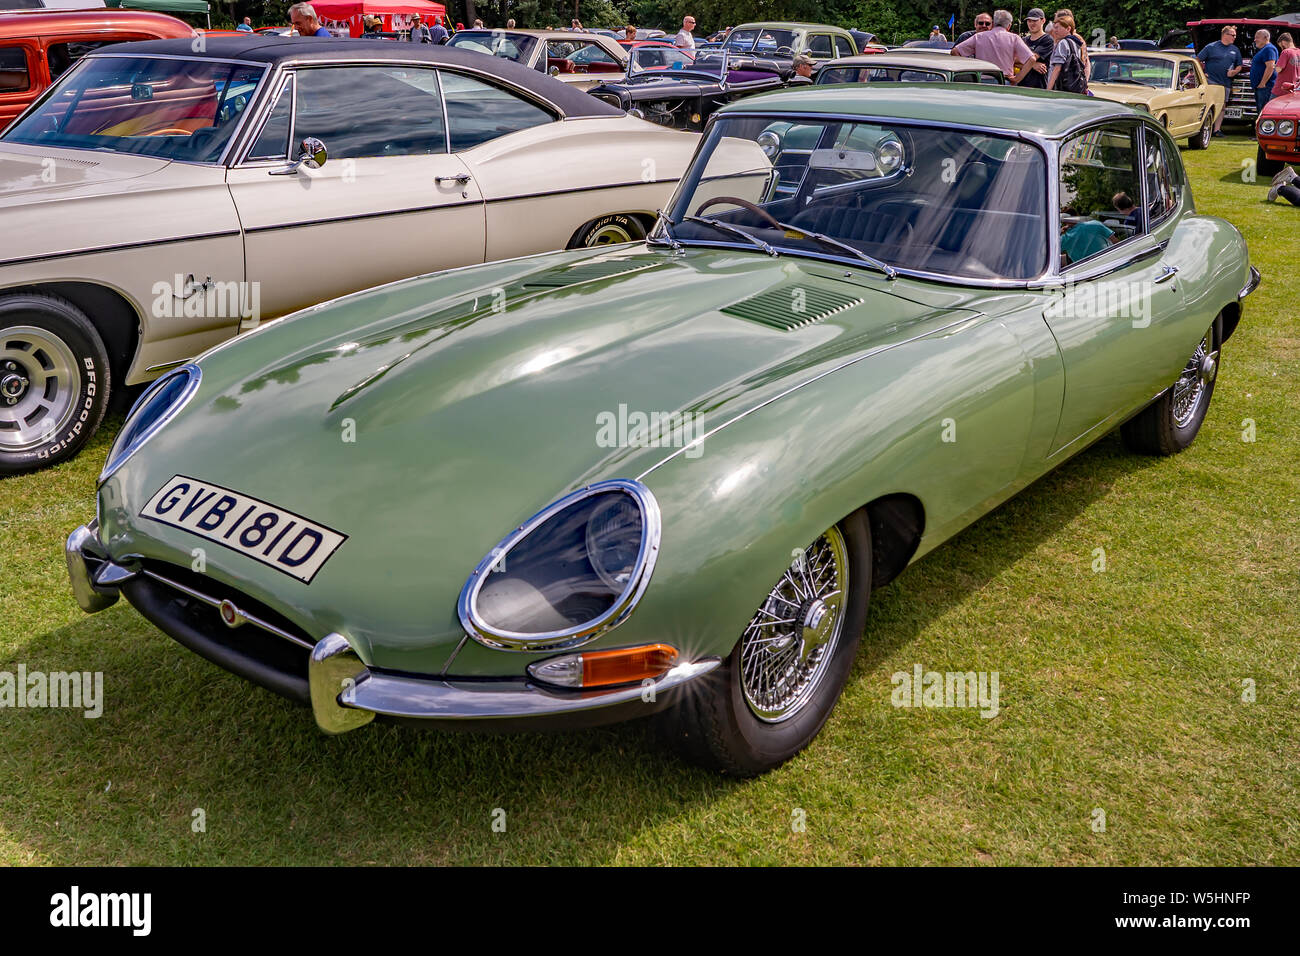 Front view of a British classic sports car, a Jaguar E Type, on display at  the classic and vintage car show at Wroxham, Norfolk, UK Stock Photo - Alamy